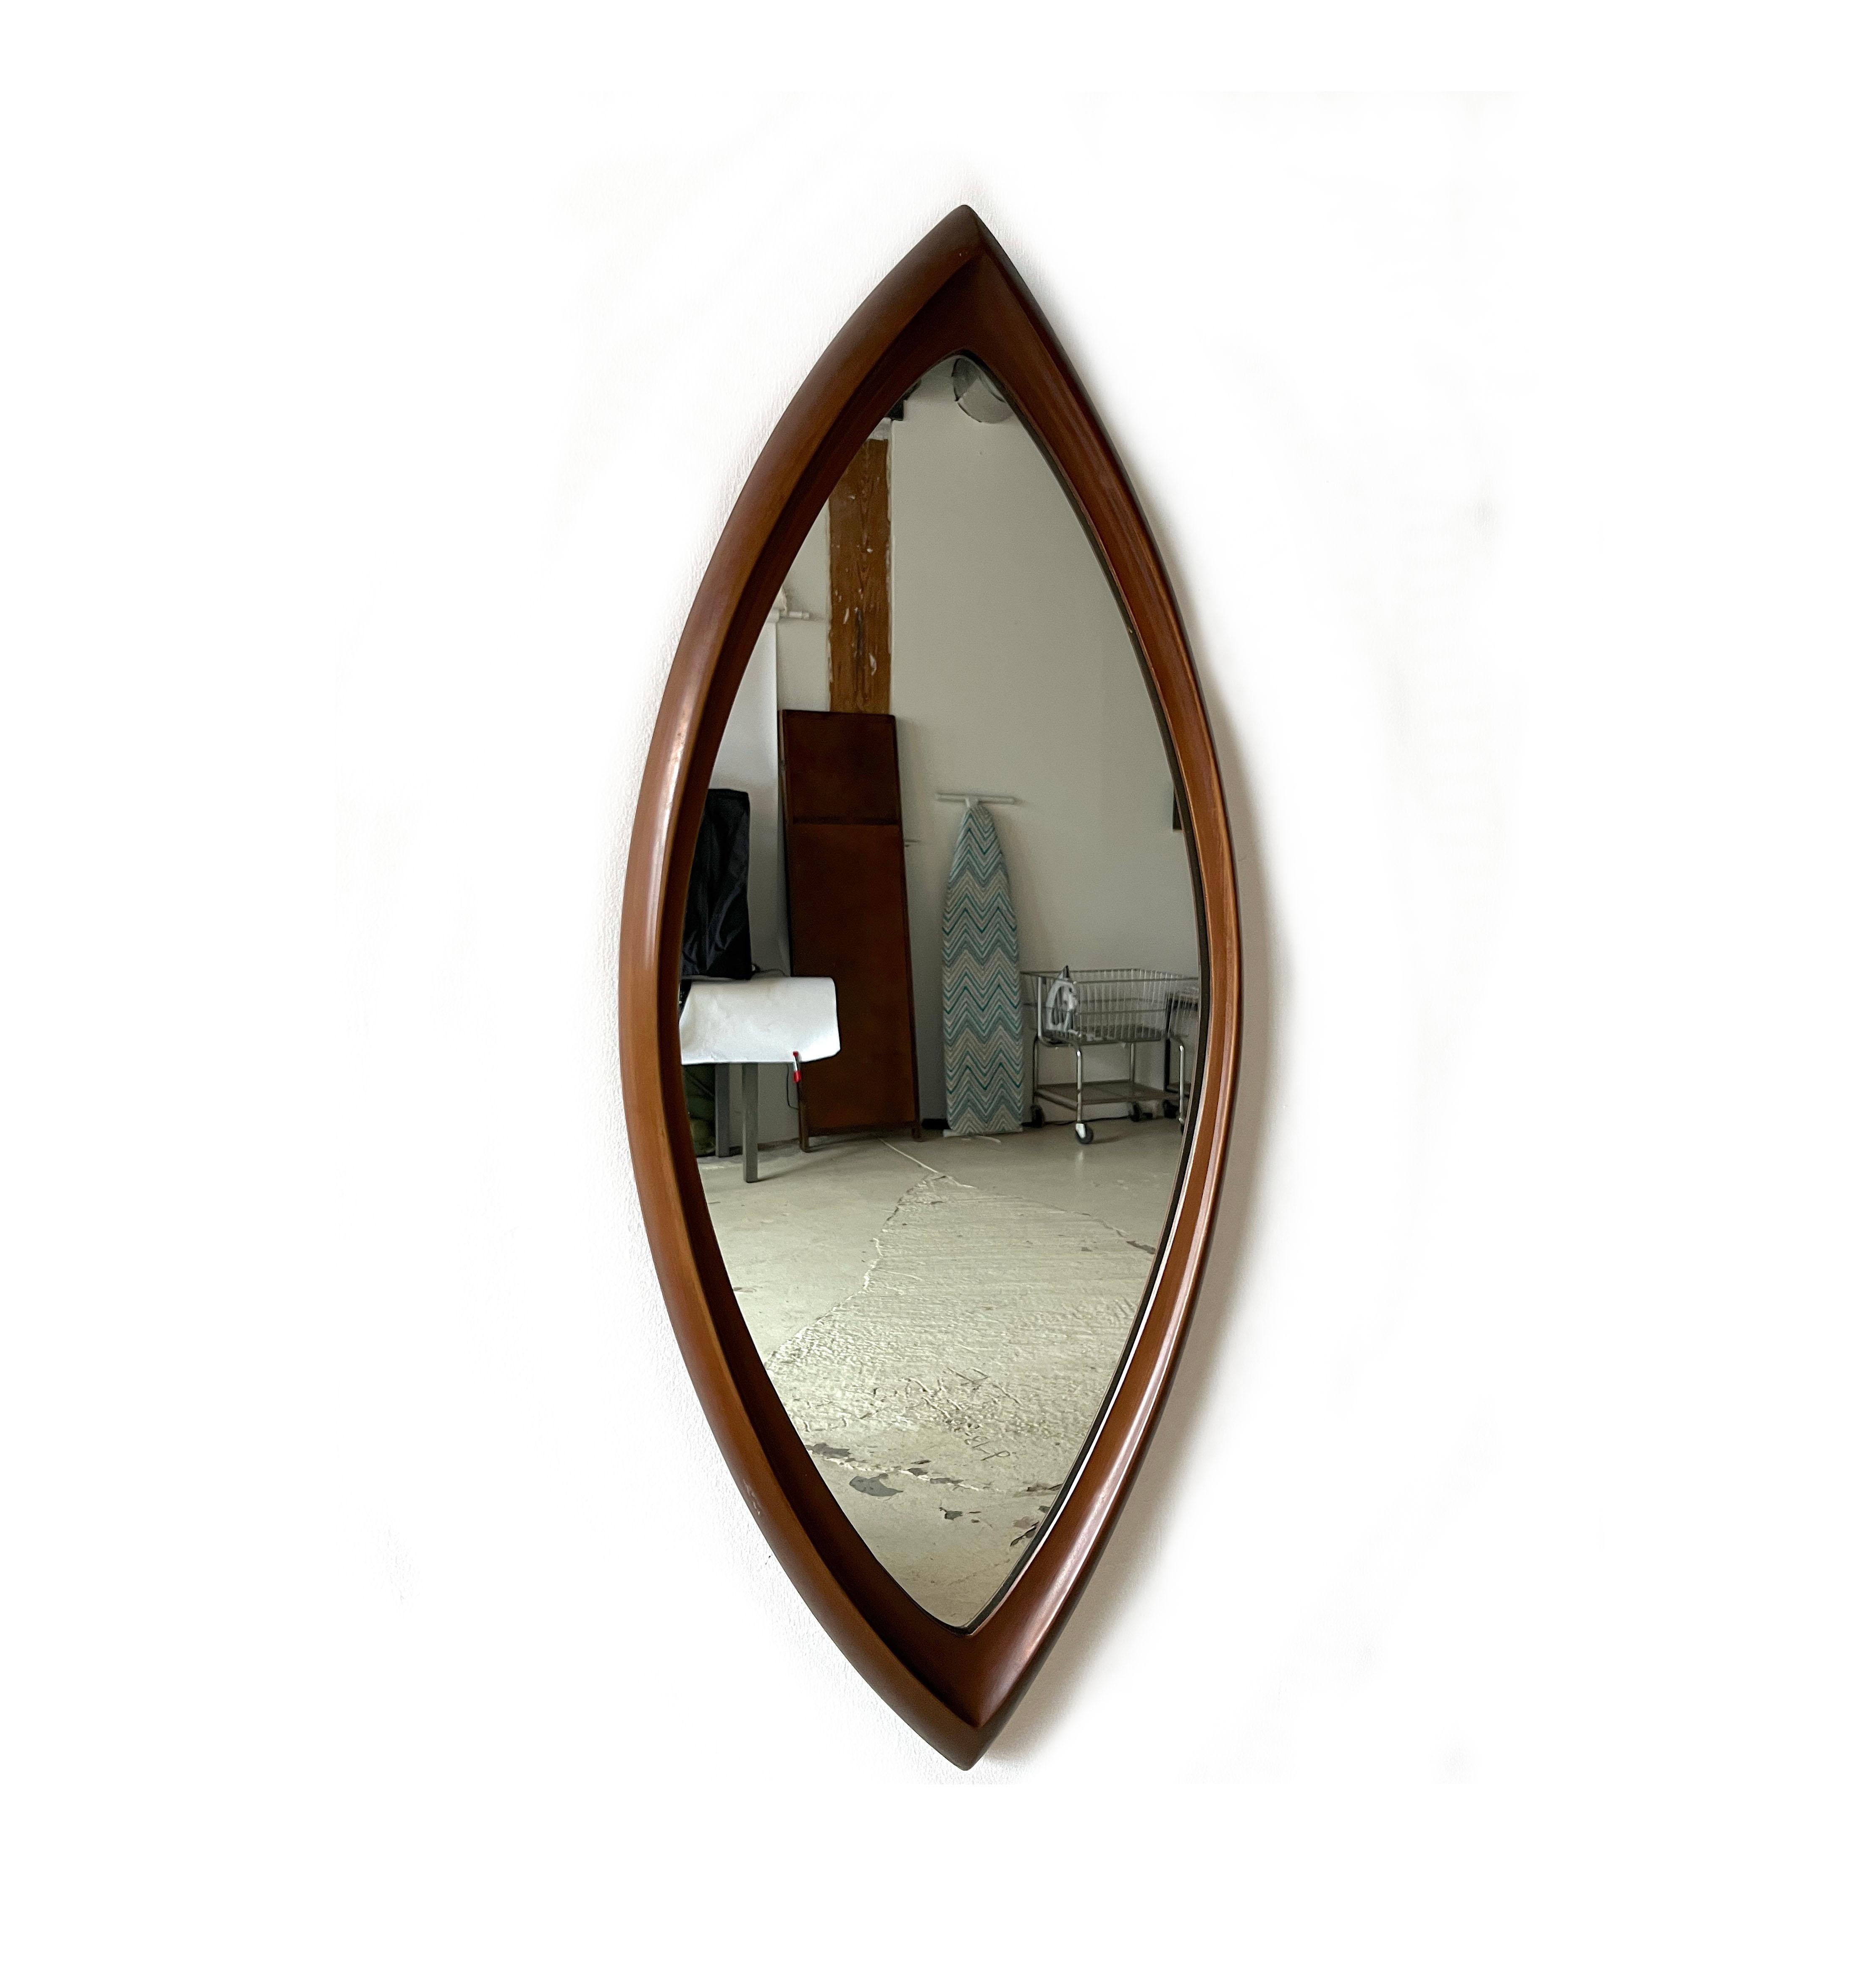 Wonderfully designed modern mirror. Molded, synthetic wood made by the Syroco Company that truly fools the eye; it looks like real wood. Great for an entry, above a dresser or in a powder room.

Cool 